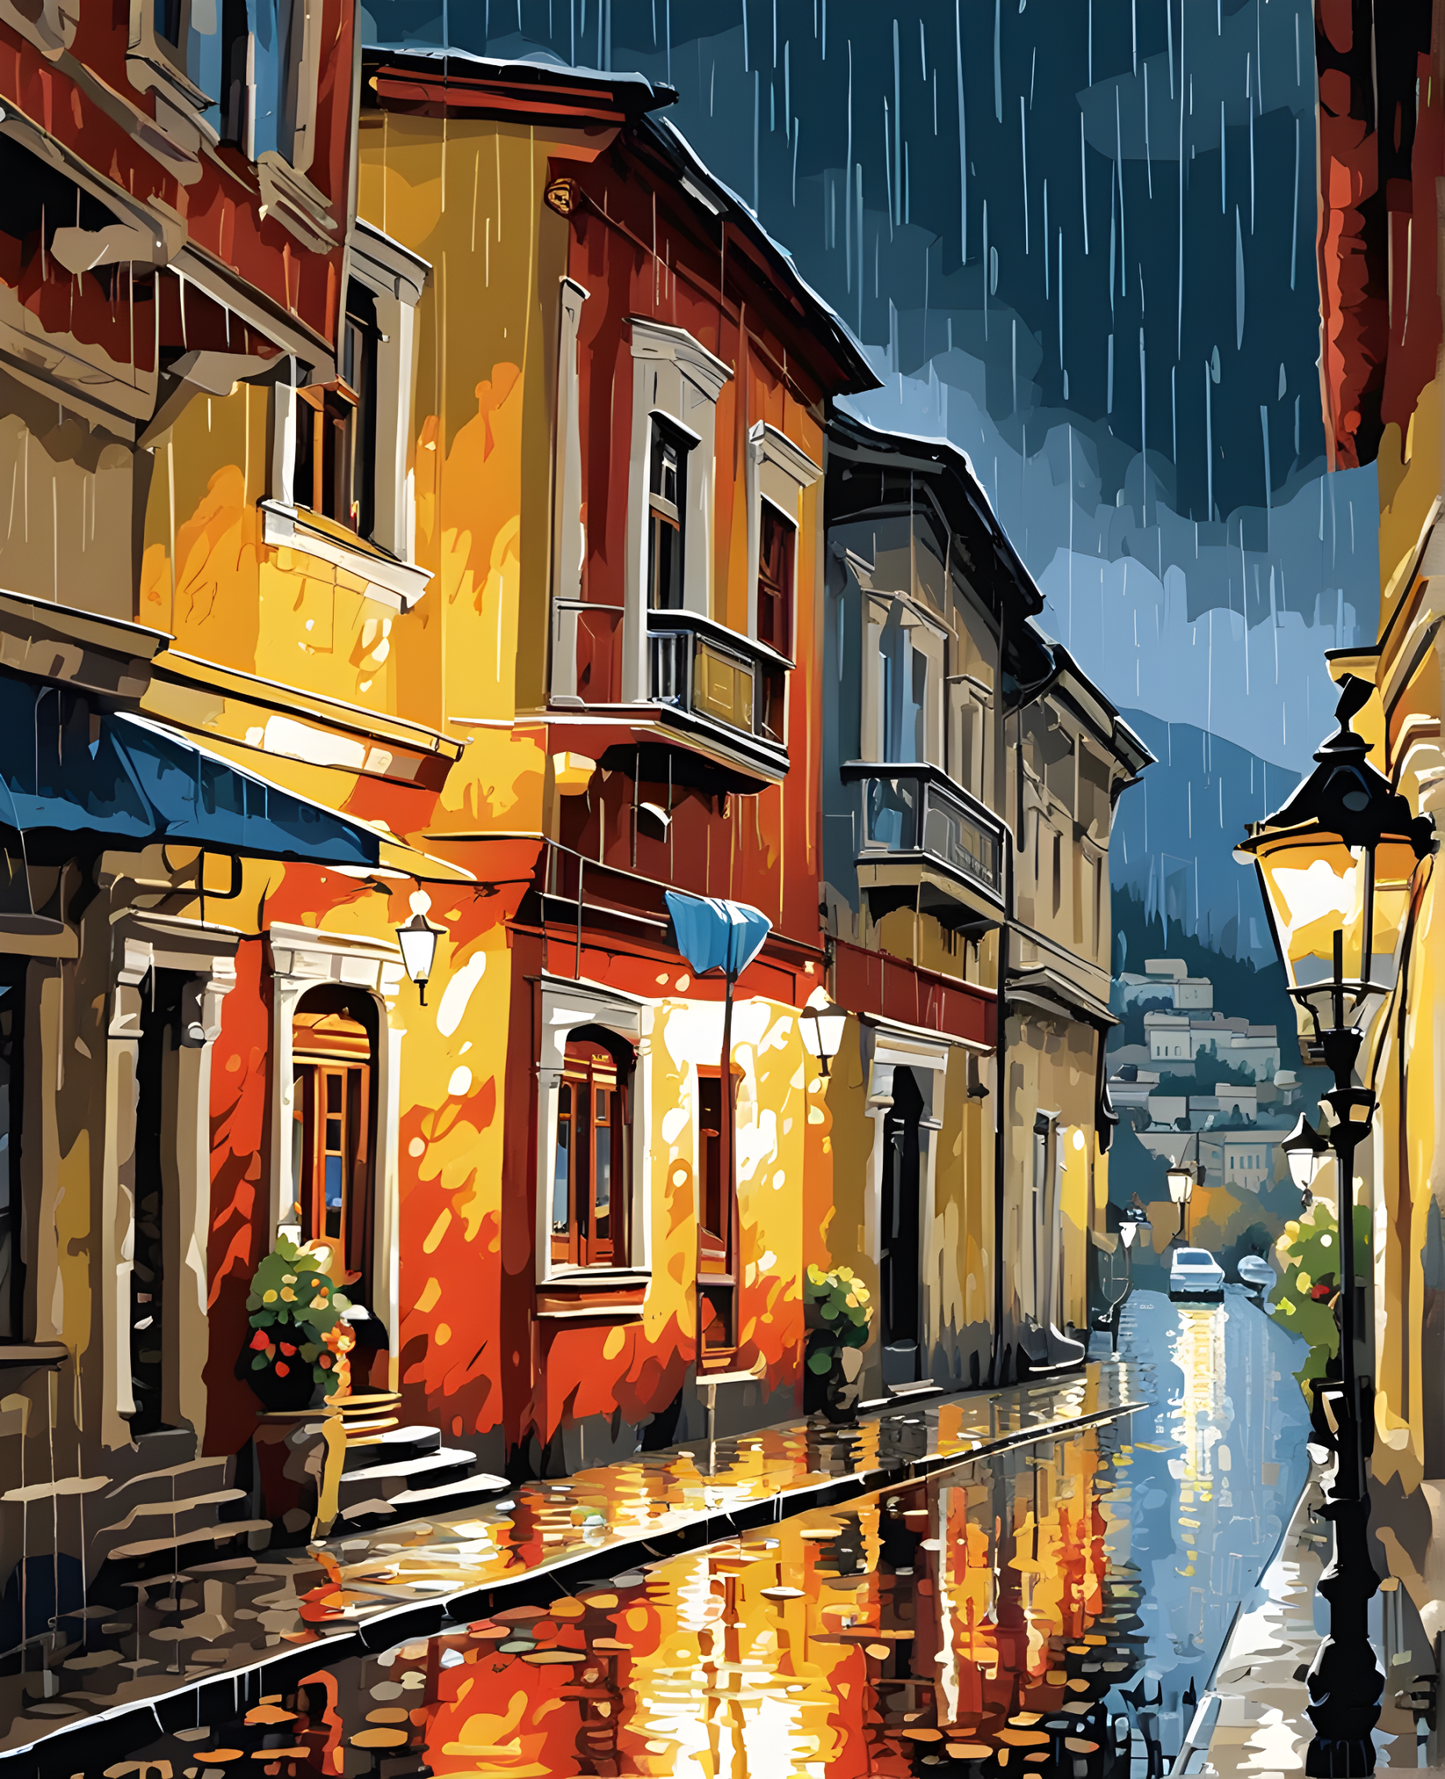 Rainy in Tbilisi (3) - Van-Go Paint-By-Number Kit